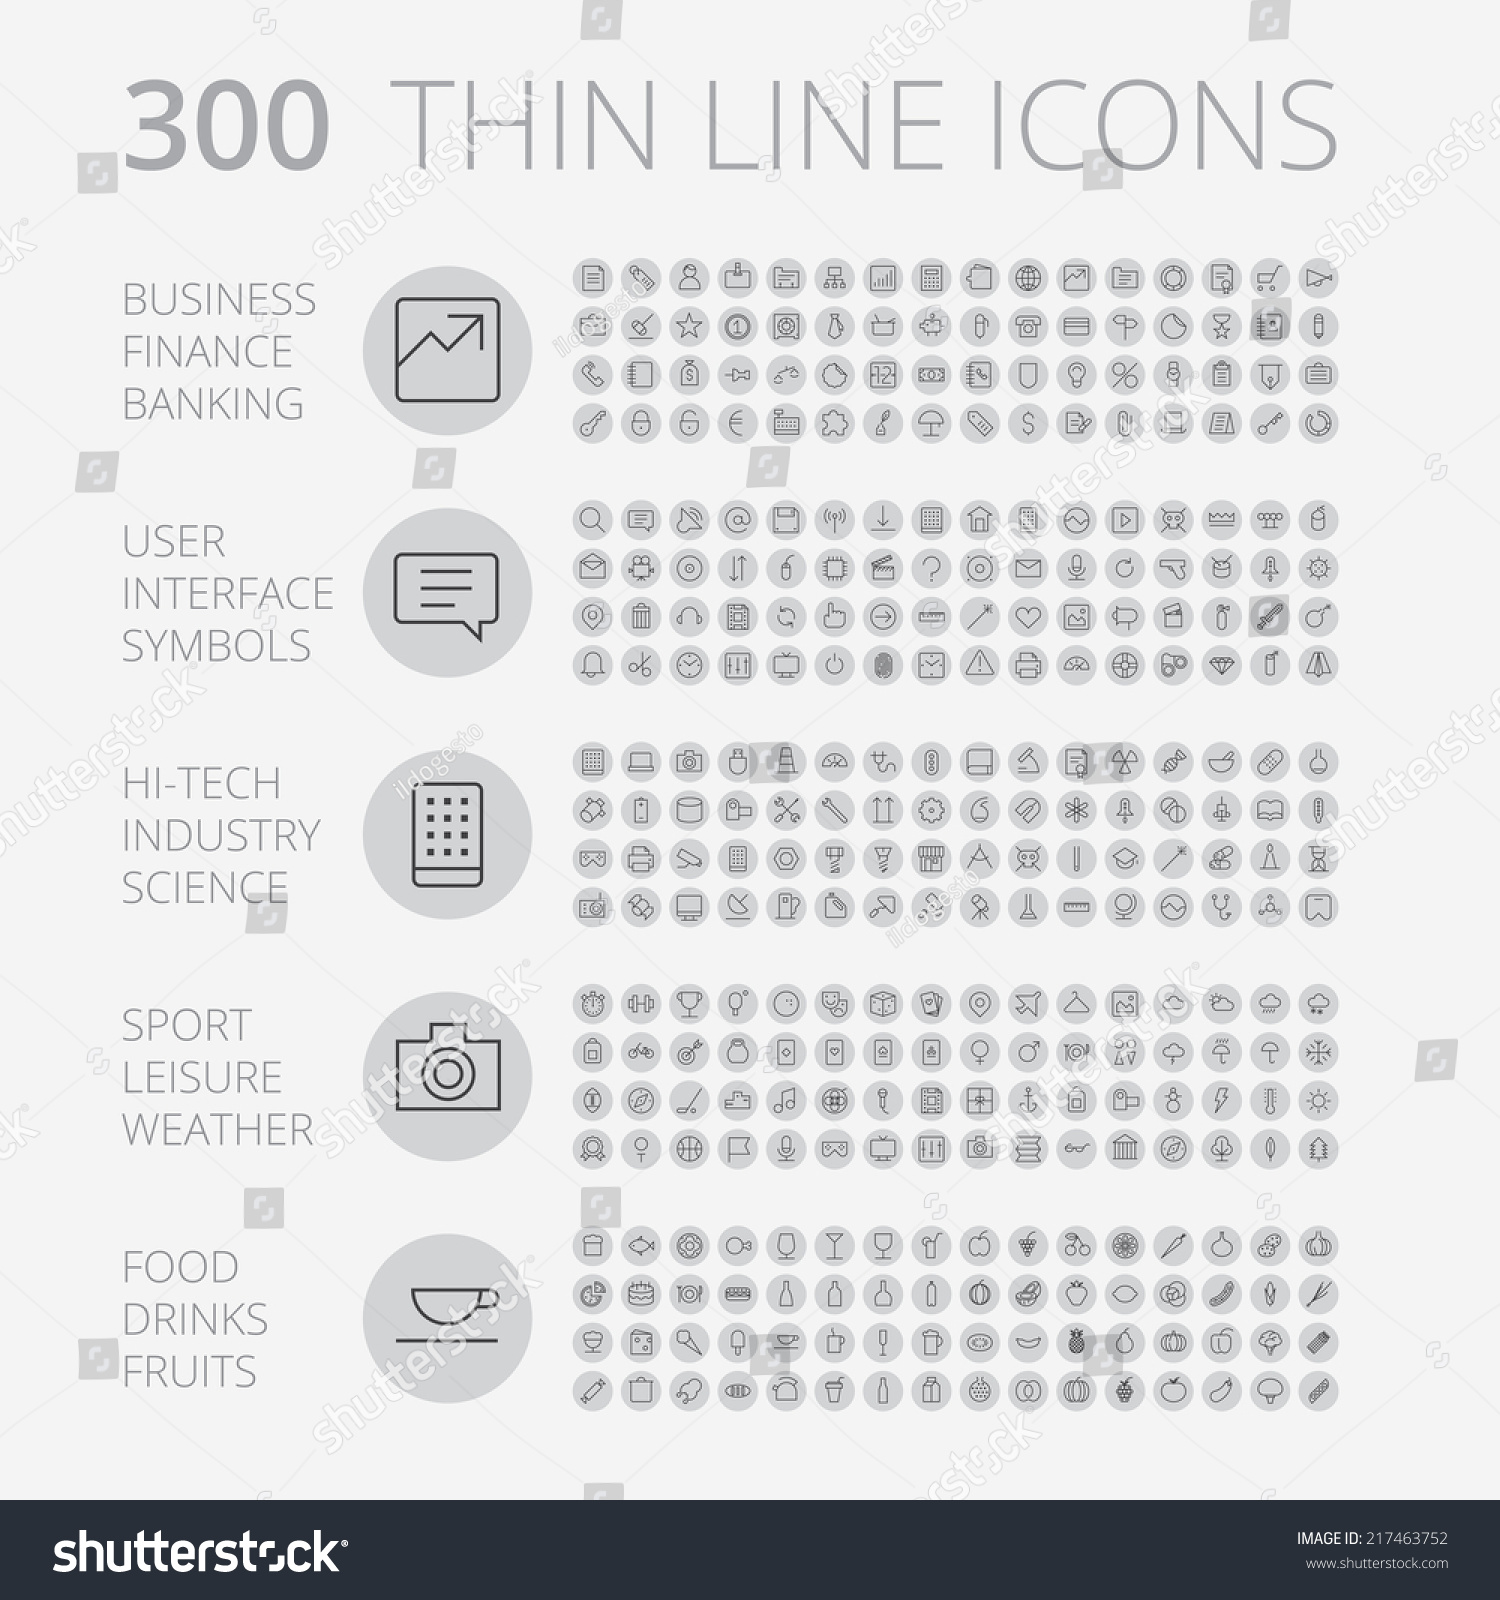 Thin Line Icons For Business, Interface, Leisure and Food. Vector eps10. #217463752